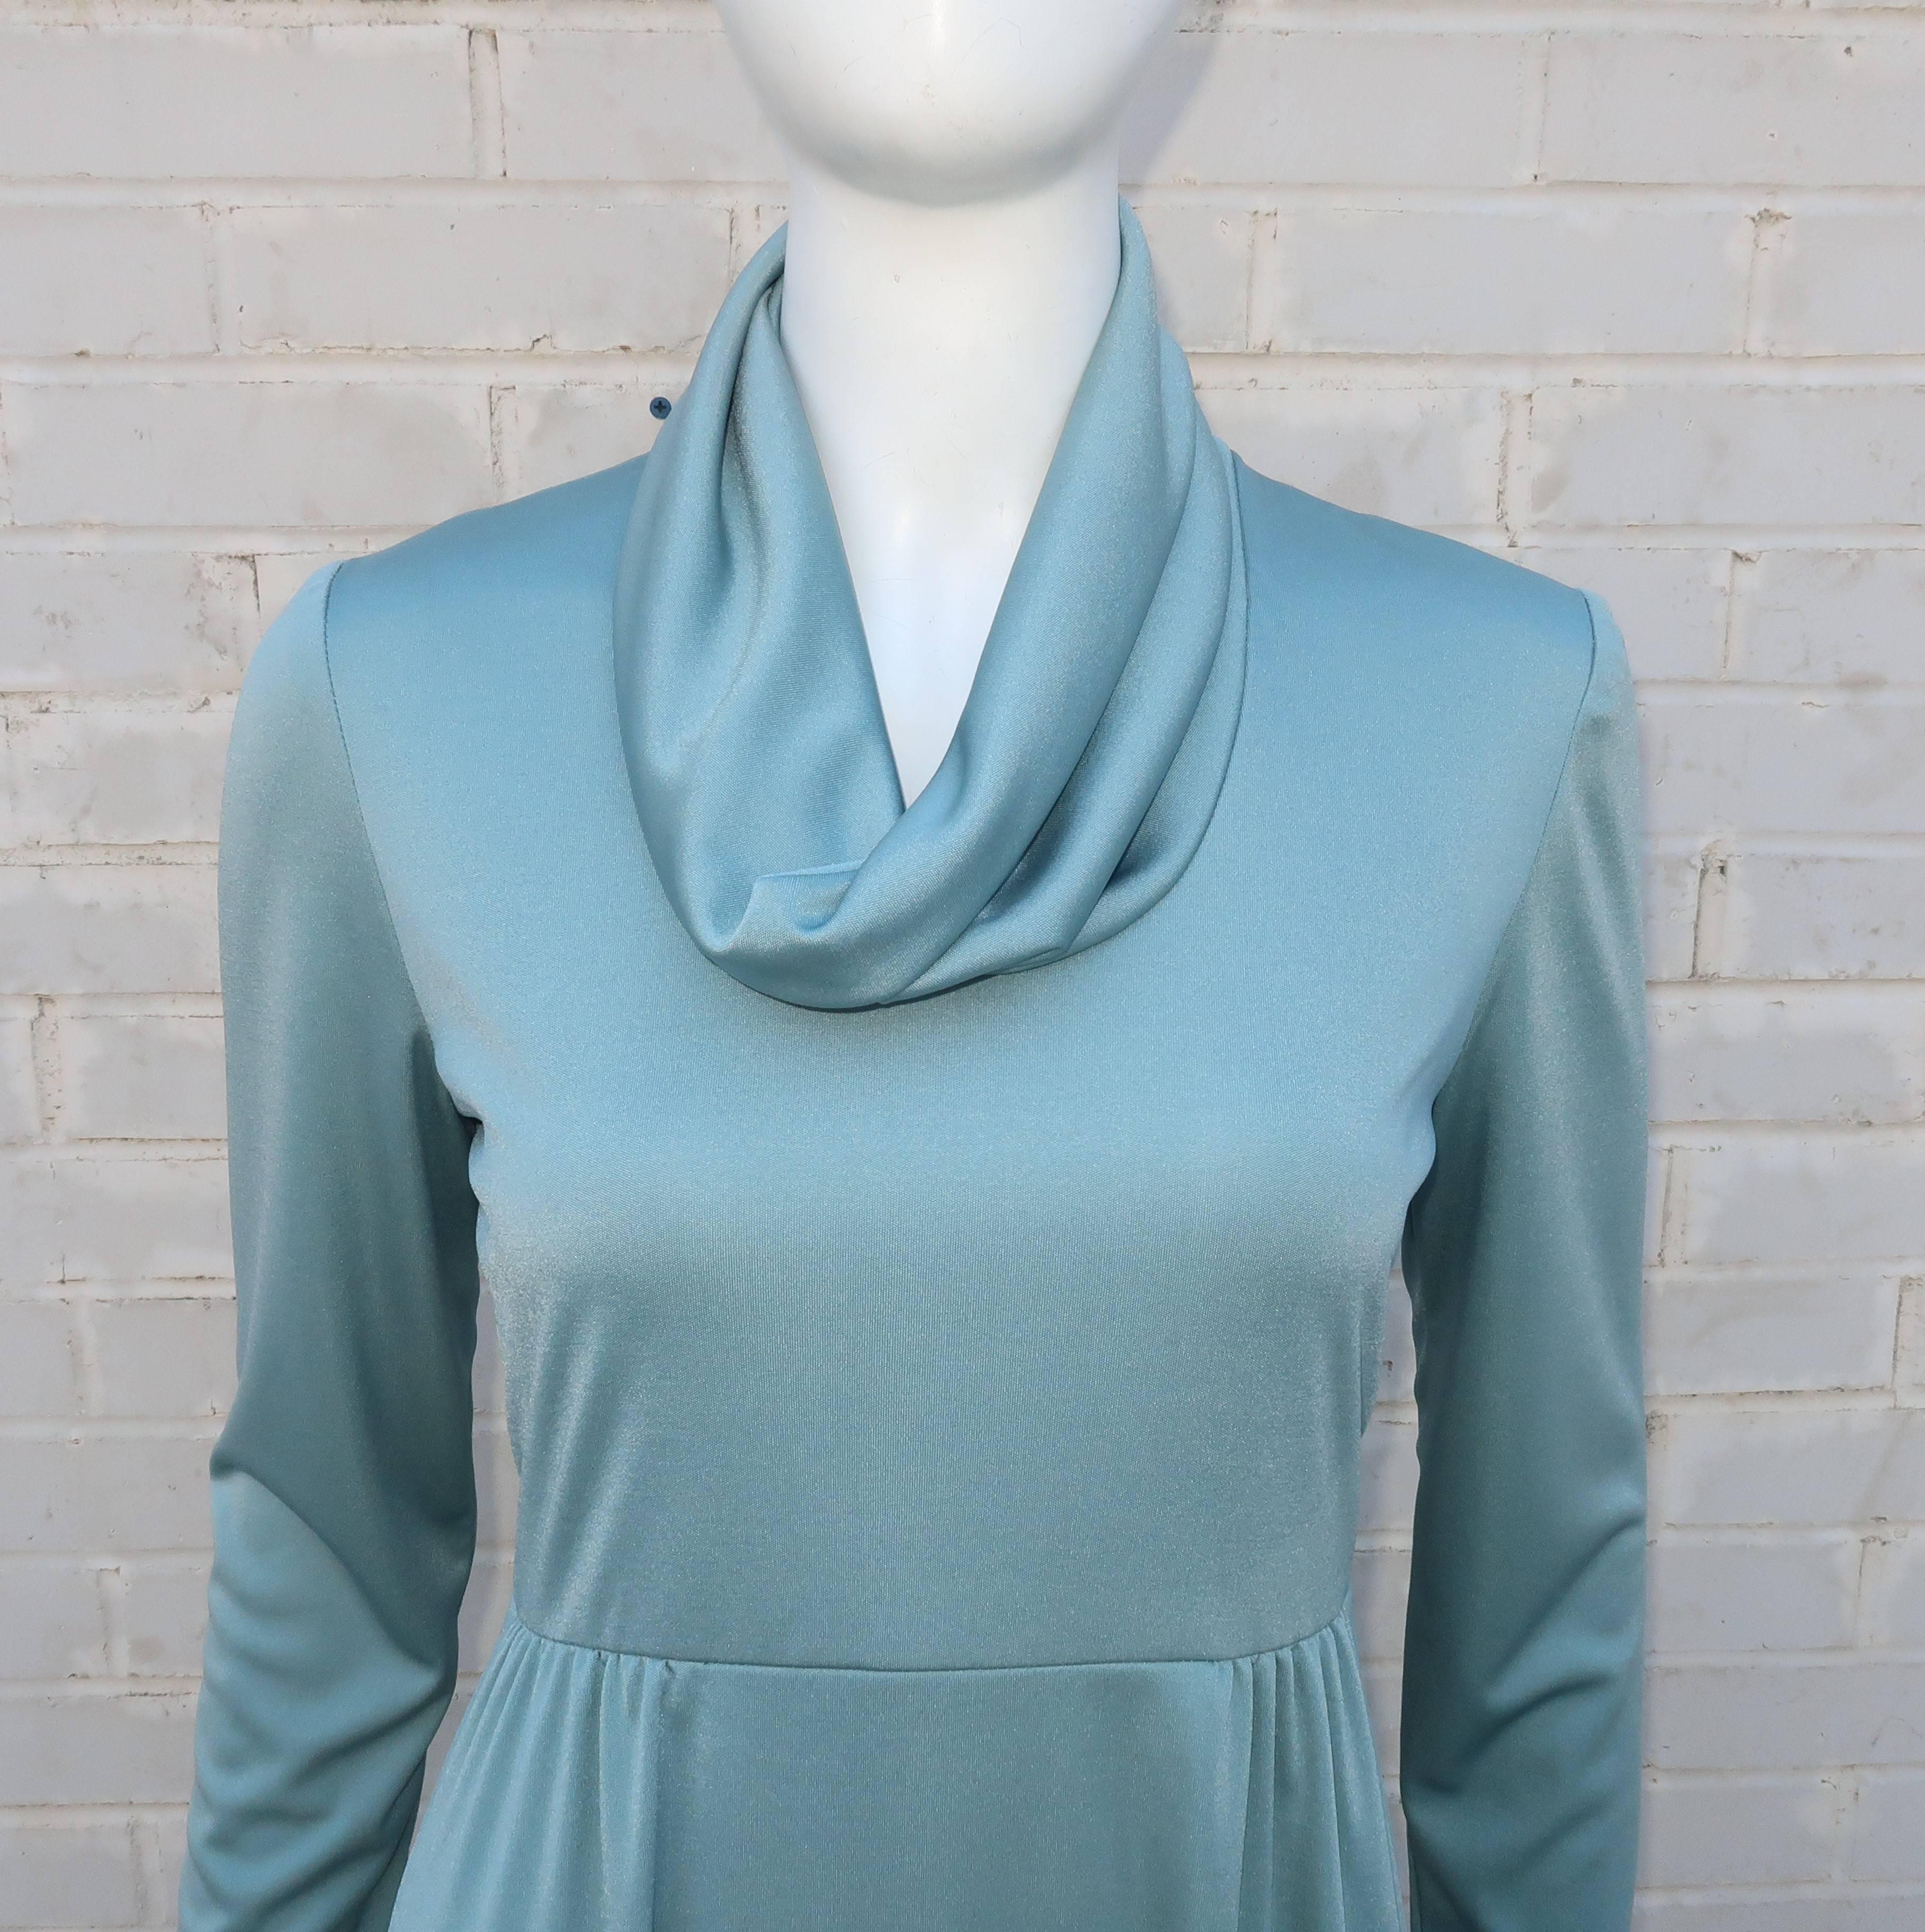 The luxurious feel of silk jersey with the easy care of polyester ... this 1970’s Act I New York seafoam dress has it all.  The body conscious drape of the silhouette is perfect to create a fluid disco look especially when paired with a strappy